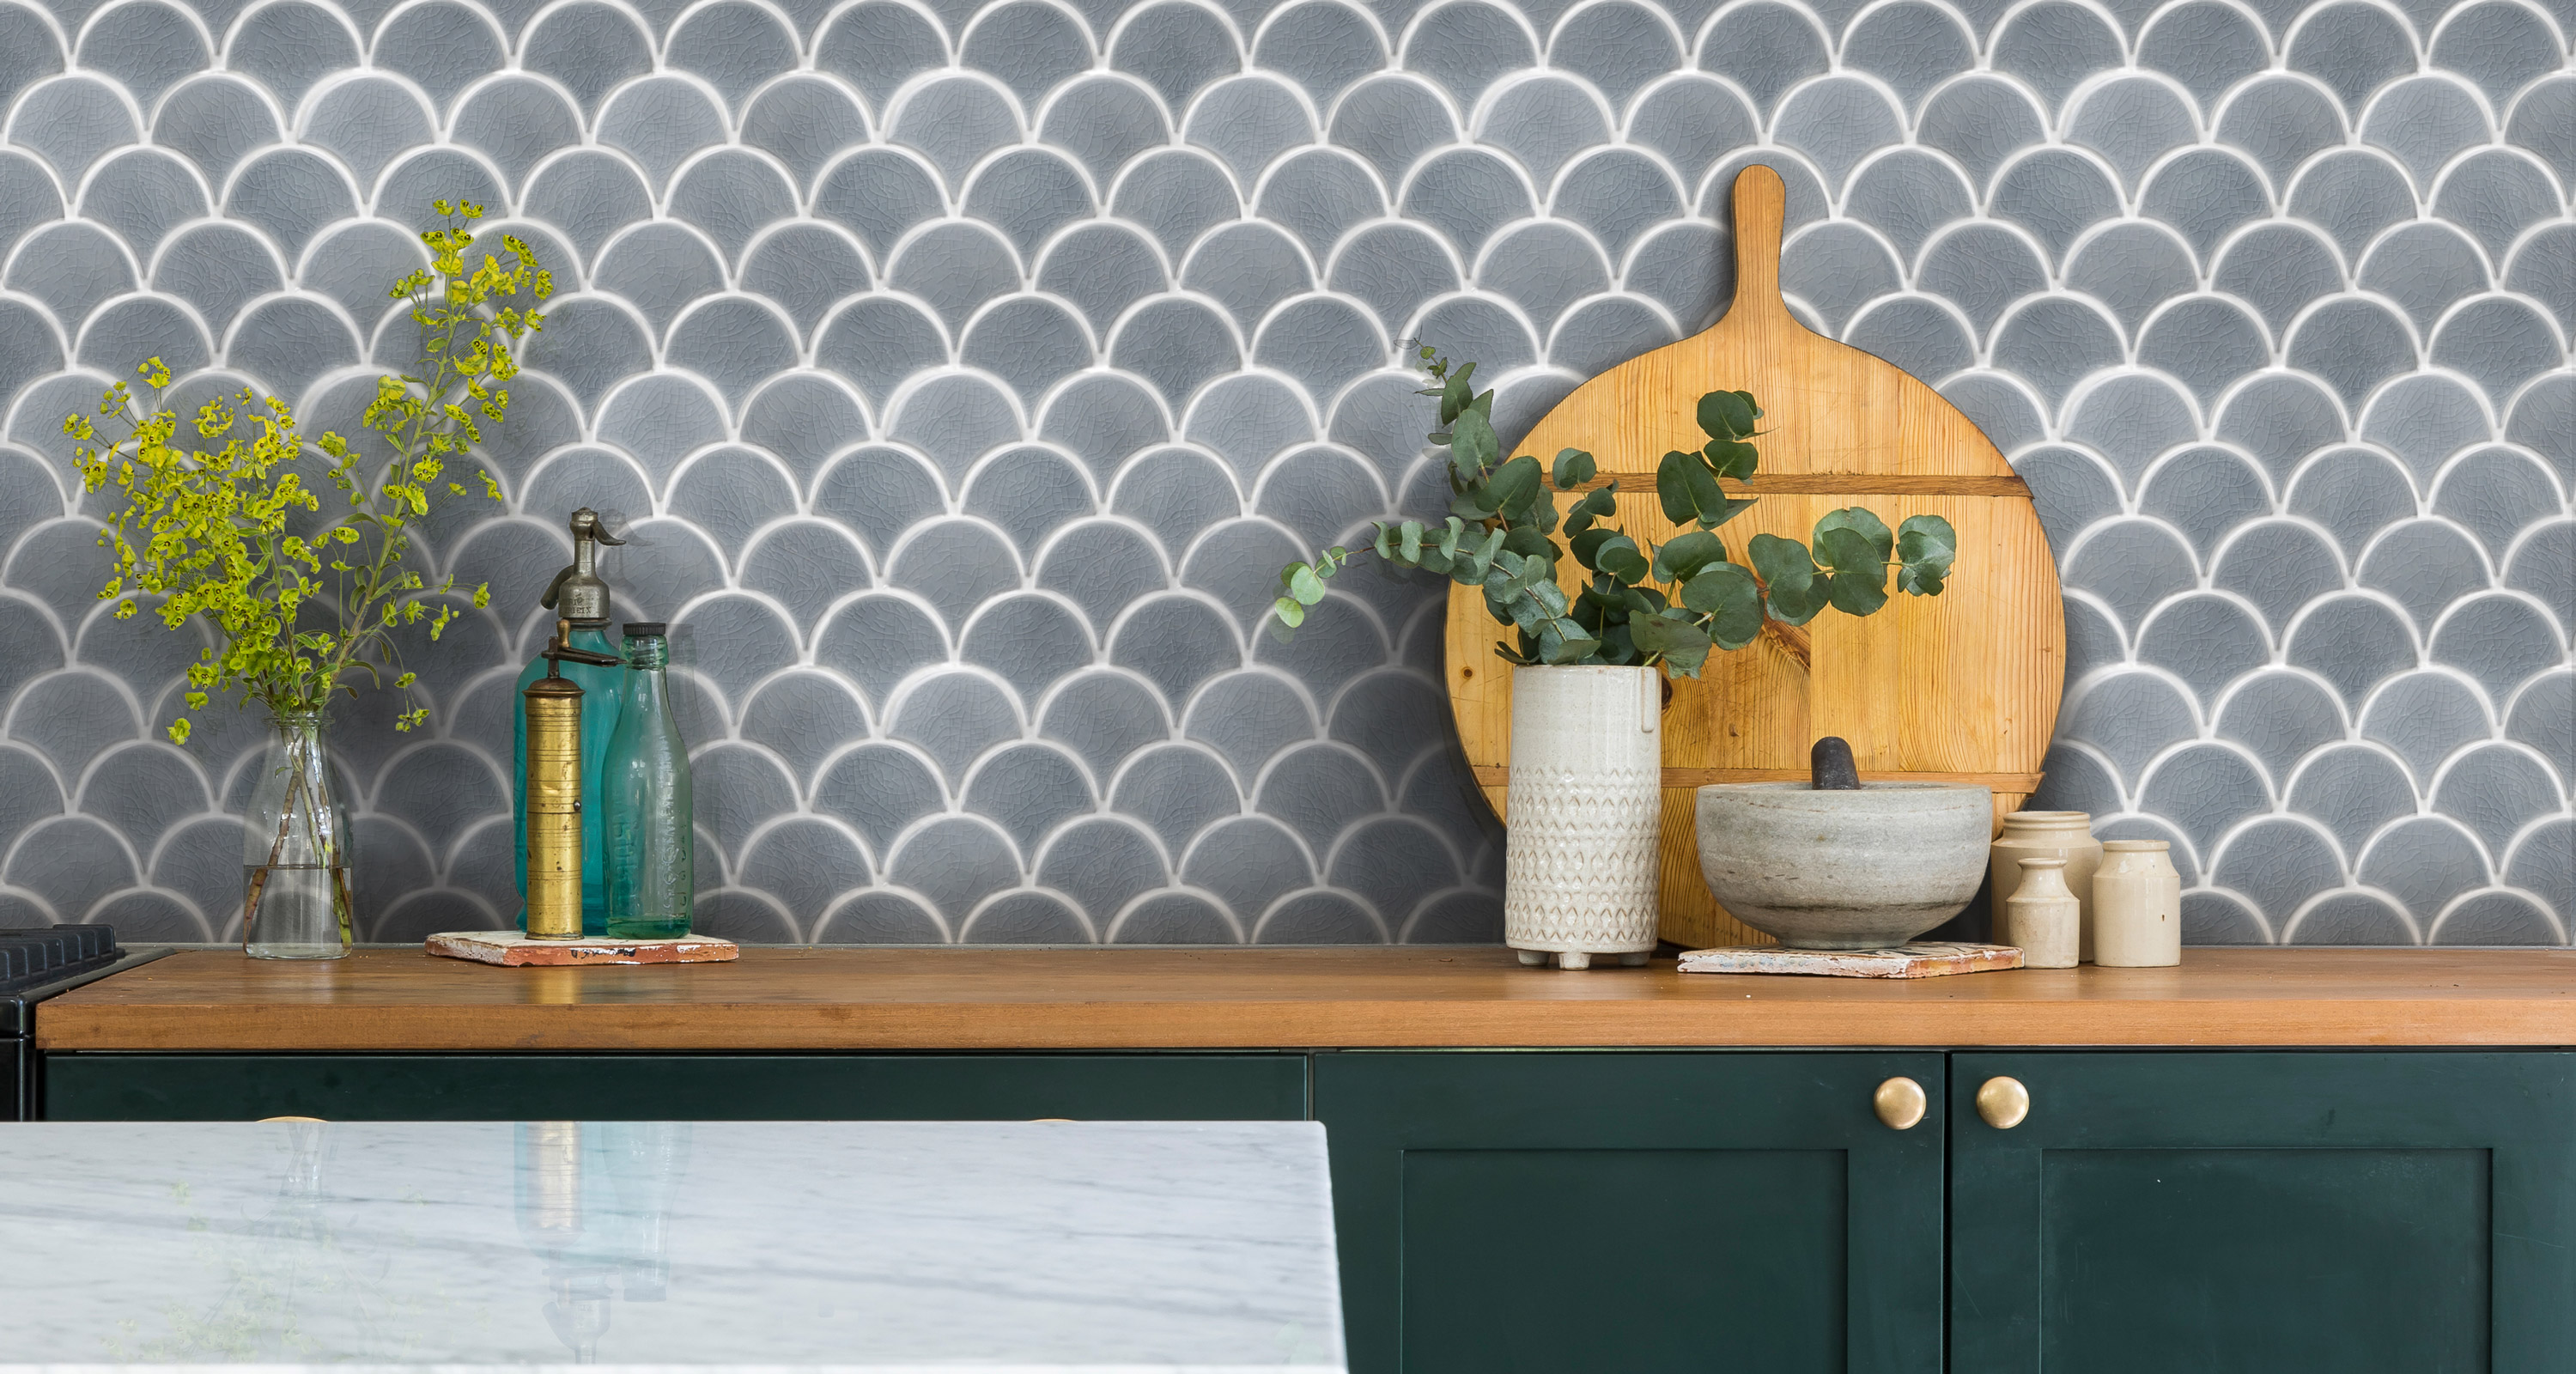 Kitchen wall tile ideas: bring color, pattern and style to vertical  surfaces | Homes & Gardens |